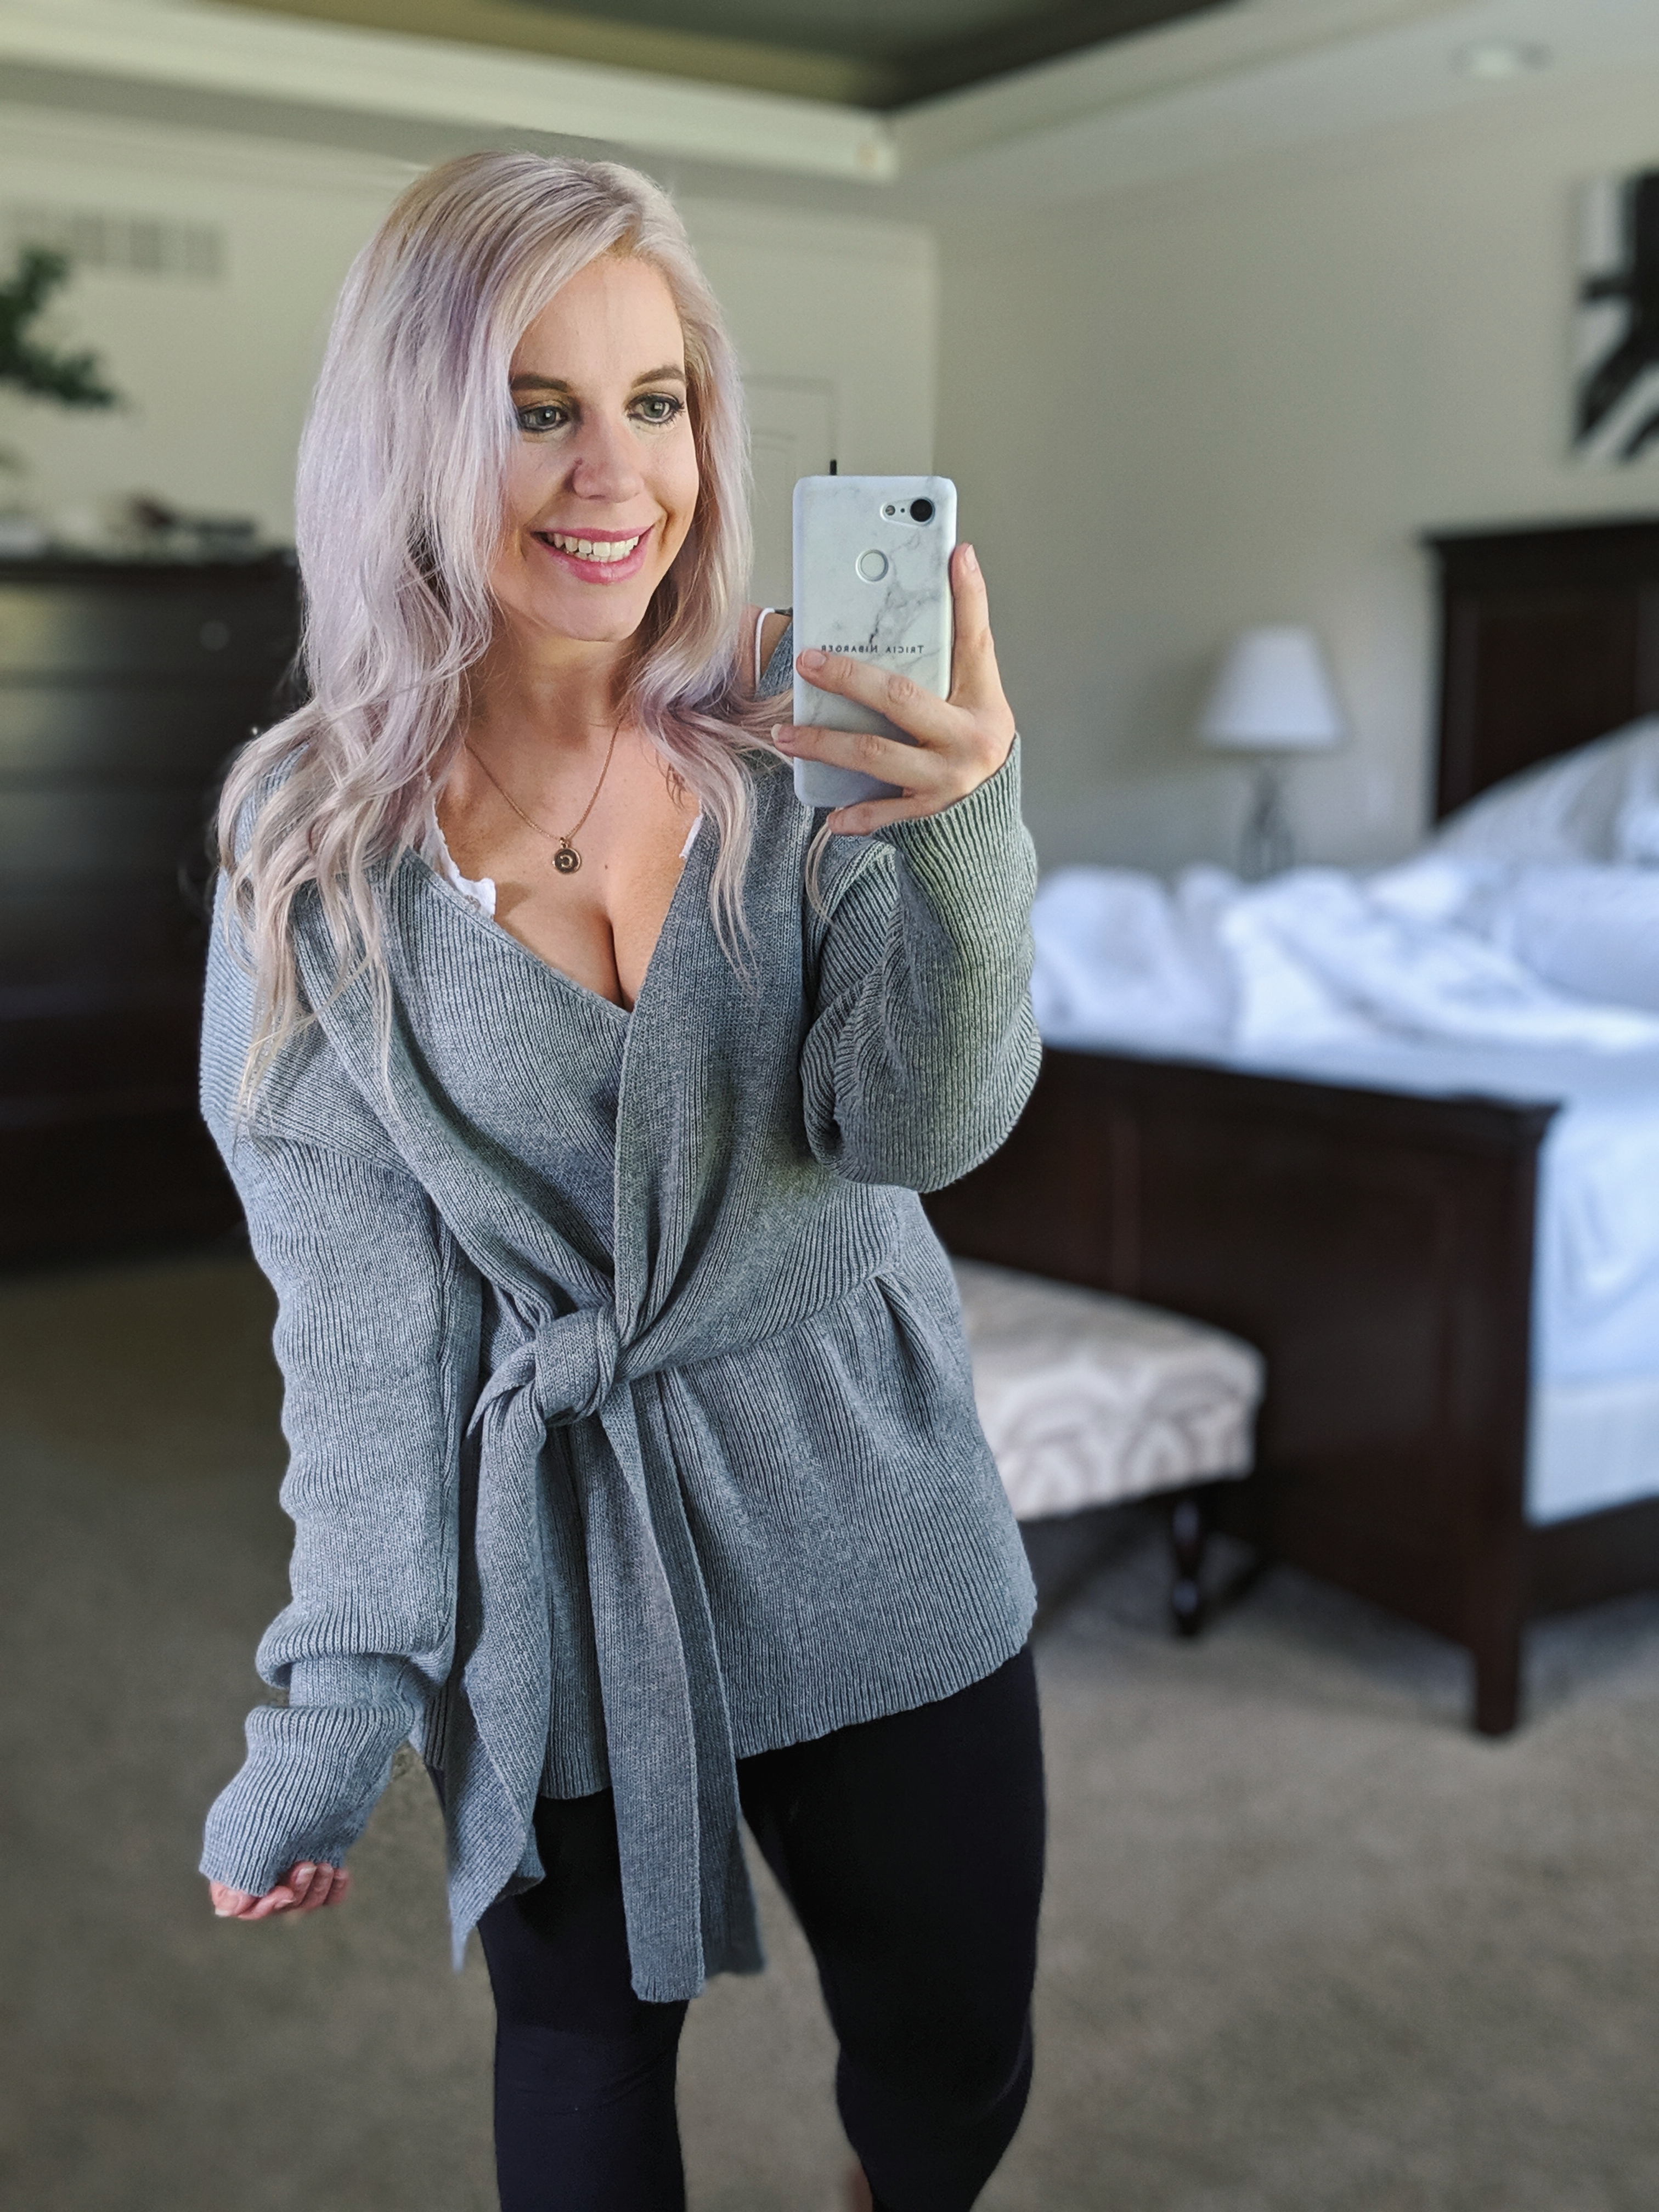 Shein Try On Haul 2019 - Is Shein legit? Shein try on haul featuring the cutest Shein finds for fall and winter 2019, styled by fashion blogger Tricia Nibarger of COVET by tricia. #shein #tryon #haul 